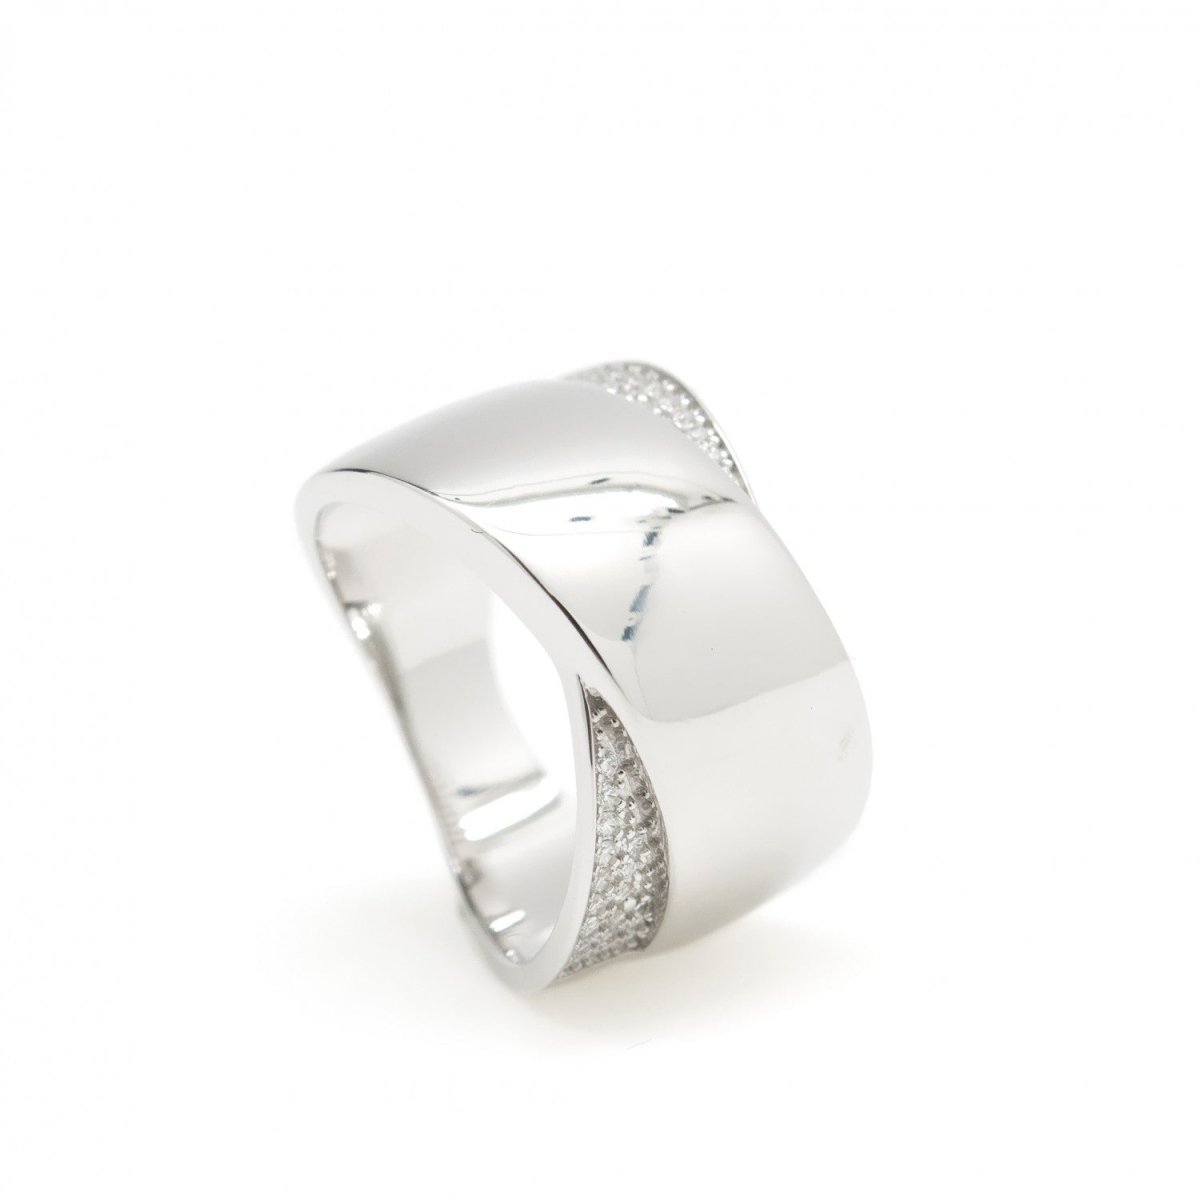 Ring - Wide rings with thick bands and zirconia design